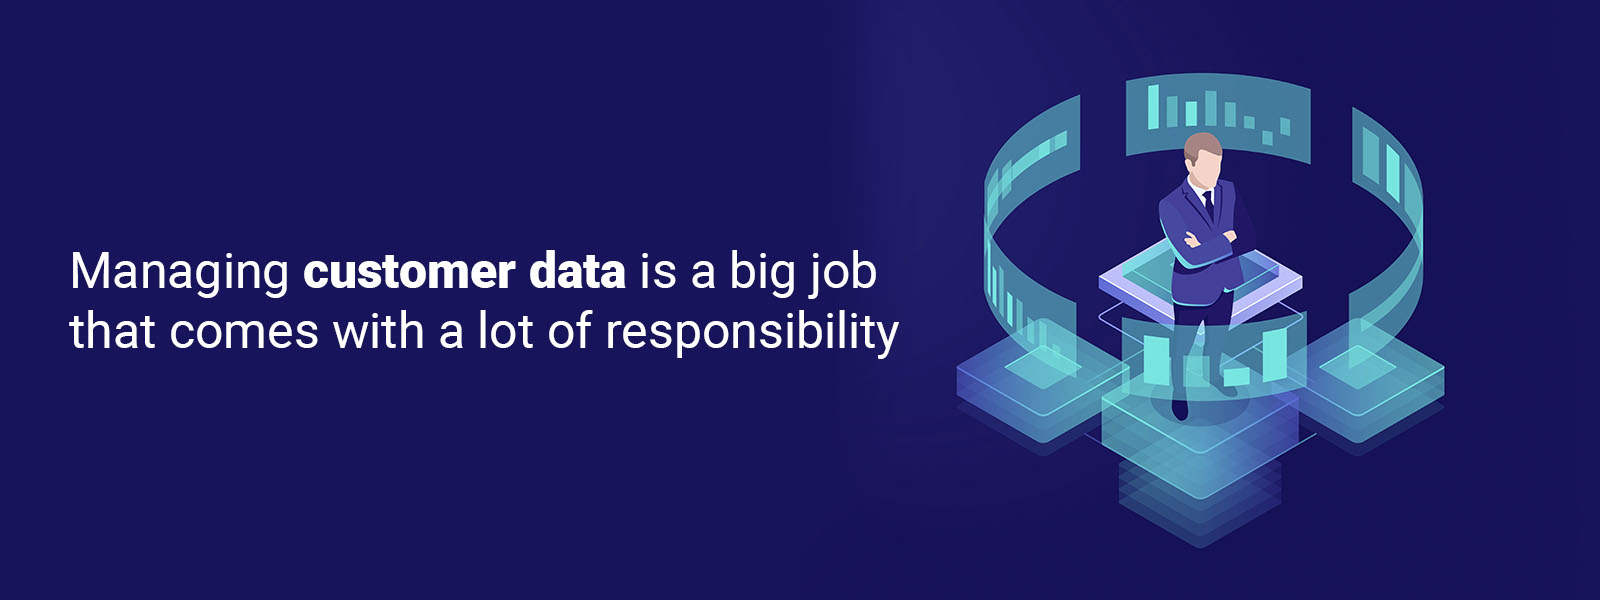 Managing customer data is a big job that comes with a lot of responsibility.